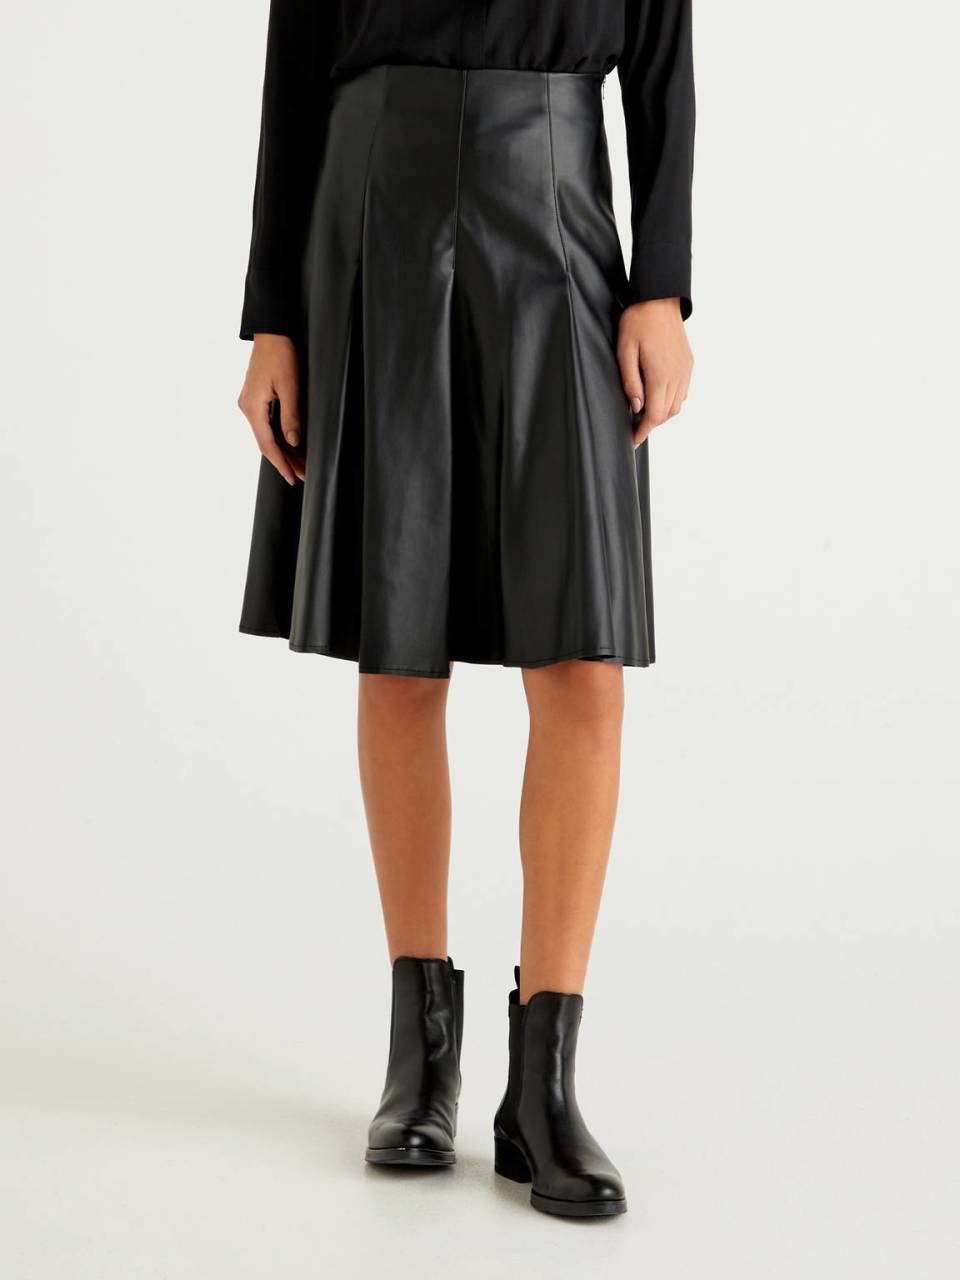 Benetton Skirt with pleats in imitation leather fabric - 4IVR507S4_100